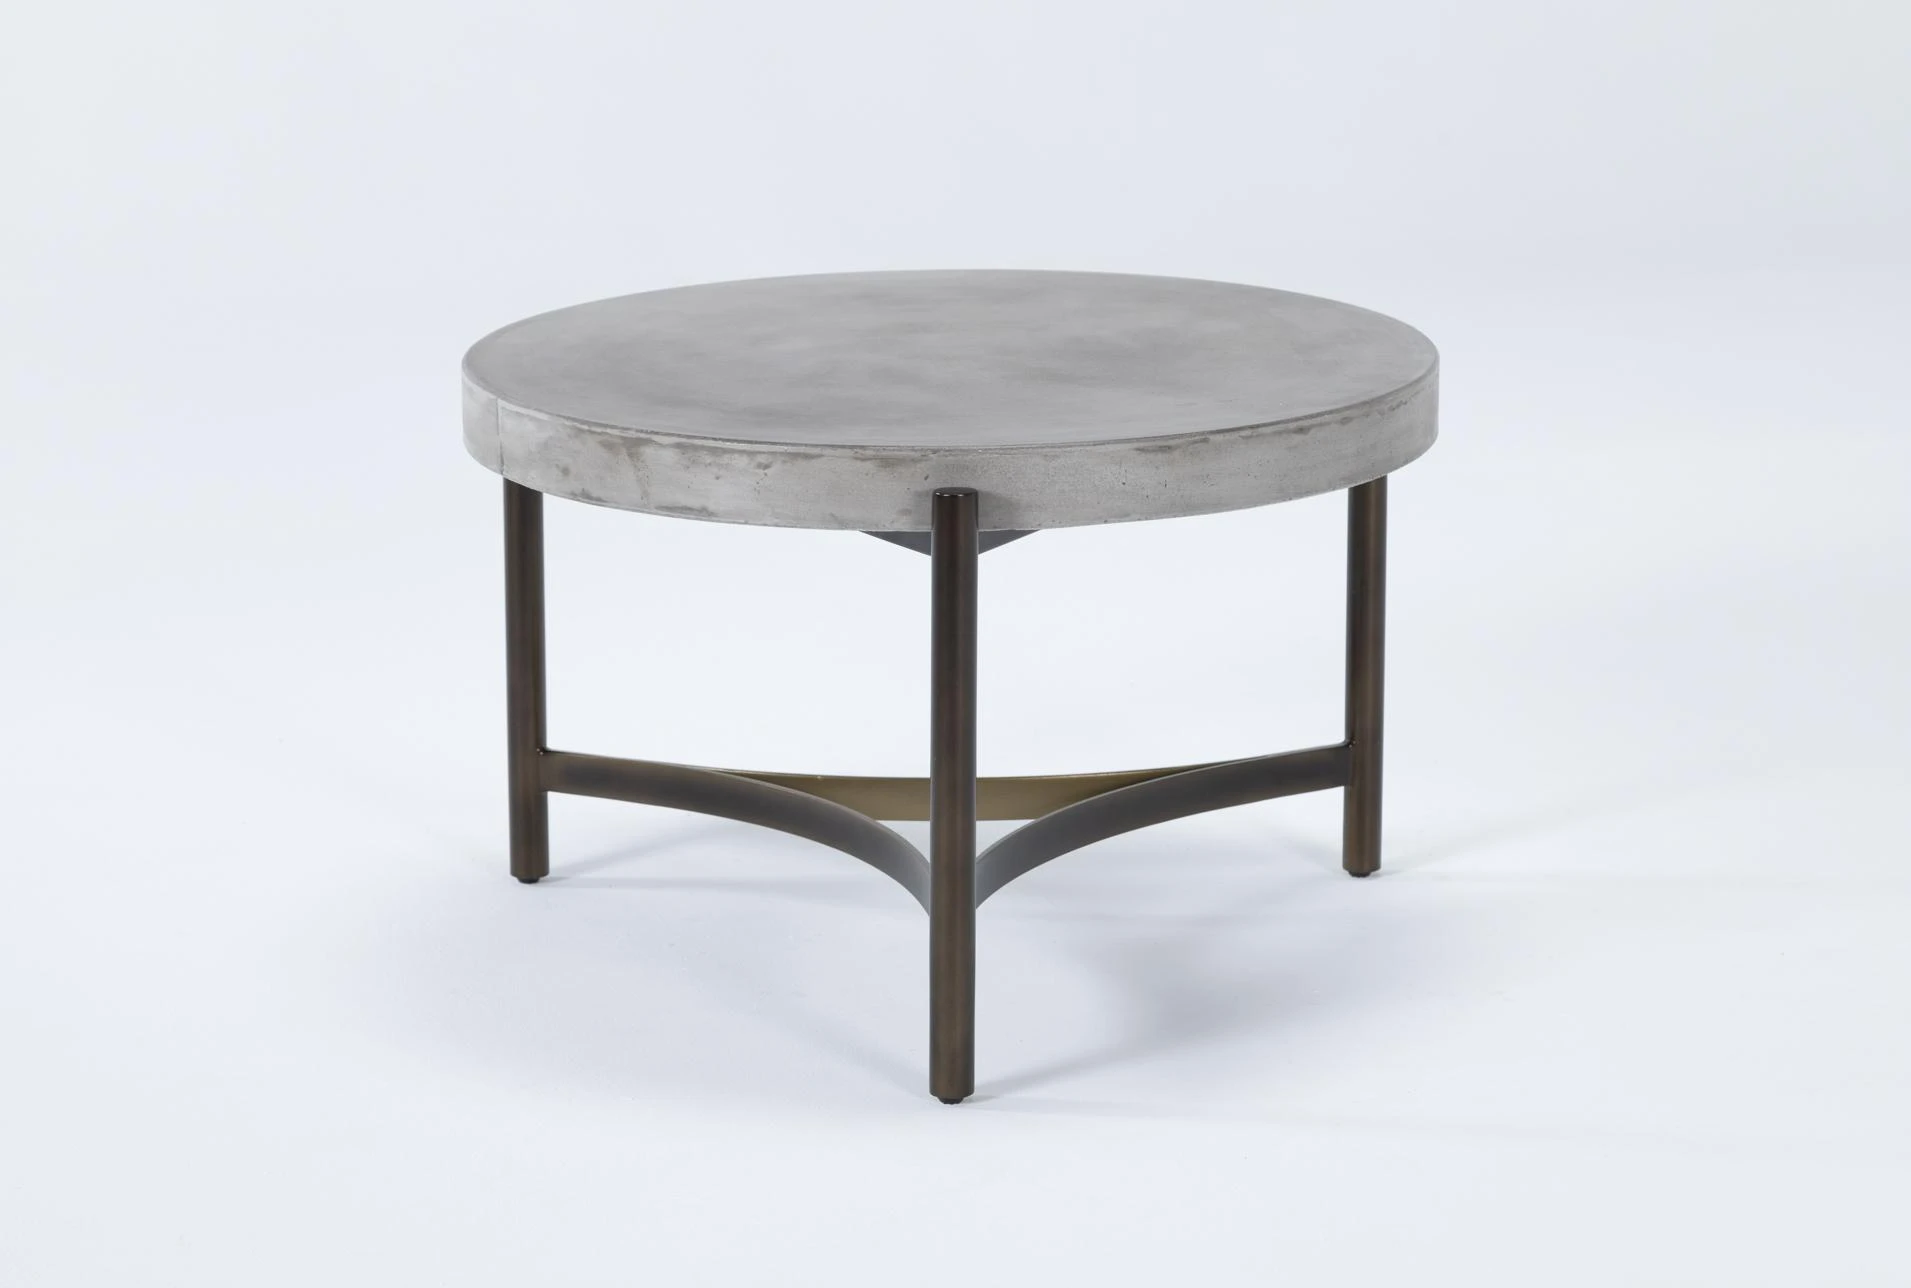 Living Room Small Side Table New Design Stylish Round Coffee Table Antique Finish Concrete Table Buy Concrete Table Concrete Coffee Table Concrete Round Table Product On Alibaba Com